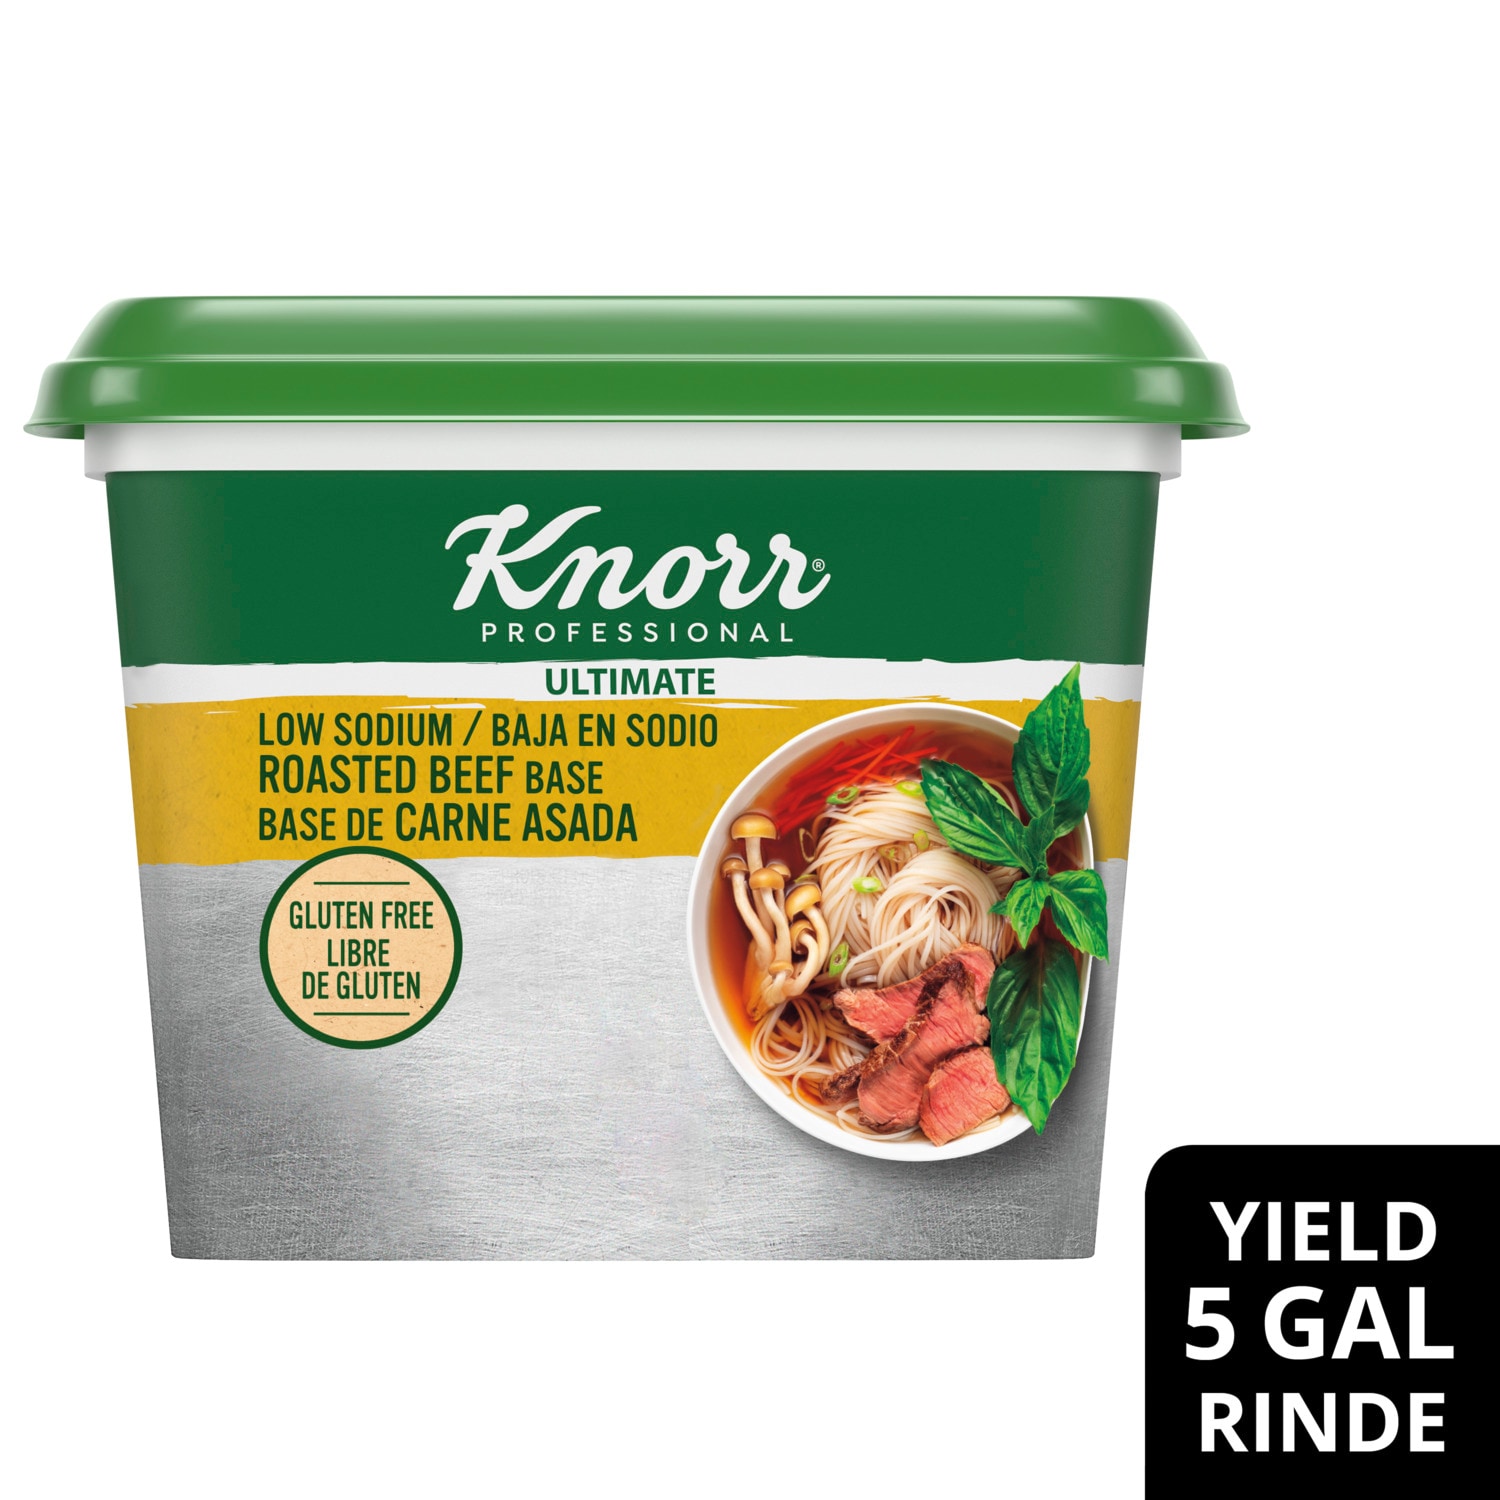 Knorr® Professional Ultimate Low Sodium Beef 1lb. 6 Pack - Excess salt in bases masks the true flavor of soups - not in Knorr® Professional Ultimate Low Sodium Beef Bouillon Base 6 x 1 lb!